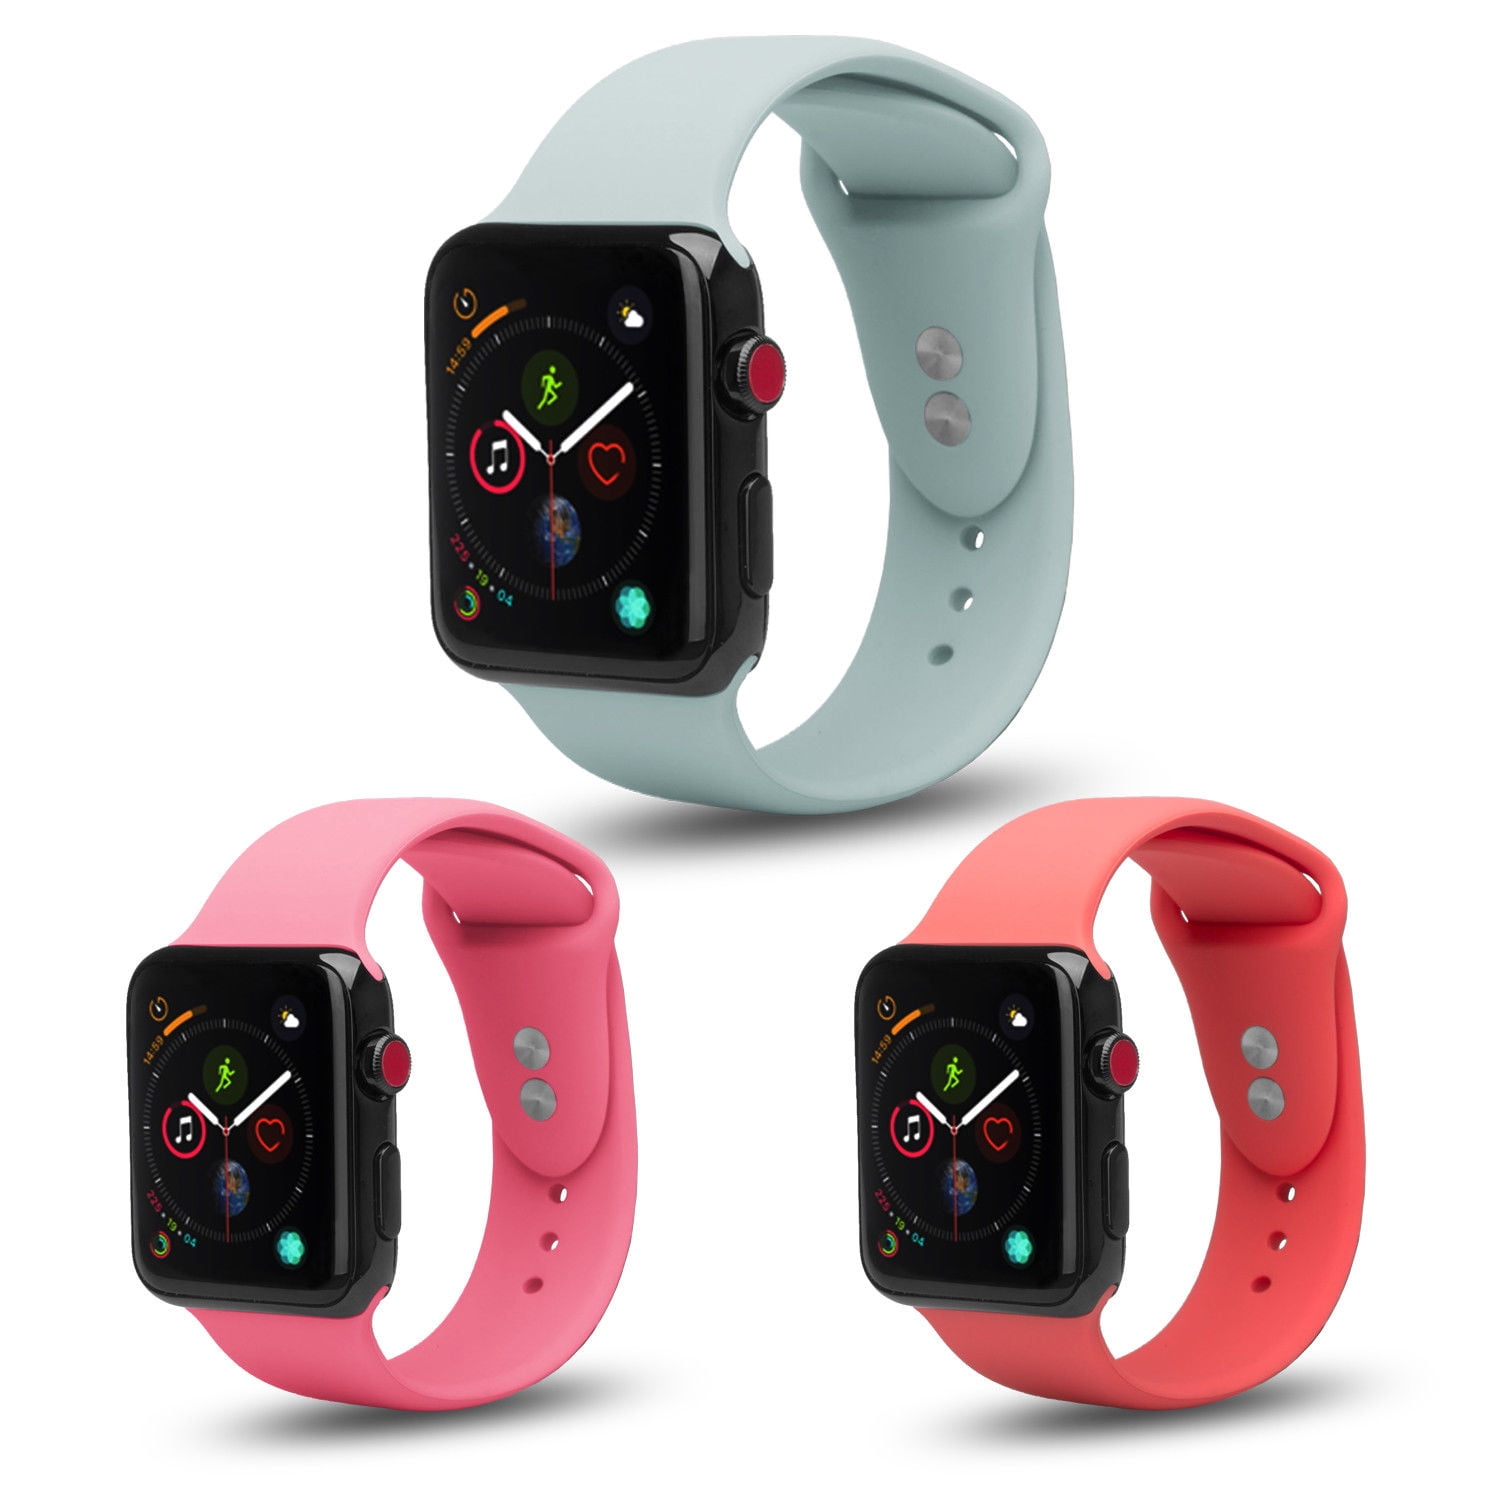 3 Pack Bundle Deal] Apple Watch Replacement 38/40/41mm, Soft Silicone Wristband for iWatch Apple Watch Series 1/2/3/4/5/6/7/8/SE/Nike+ - - Walmart.com